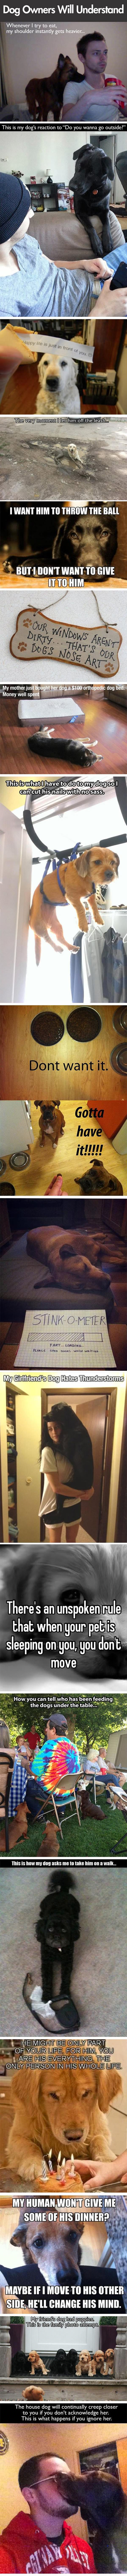 Dog Owners funny picture